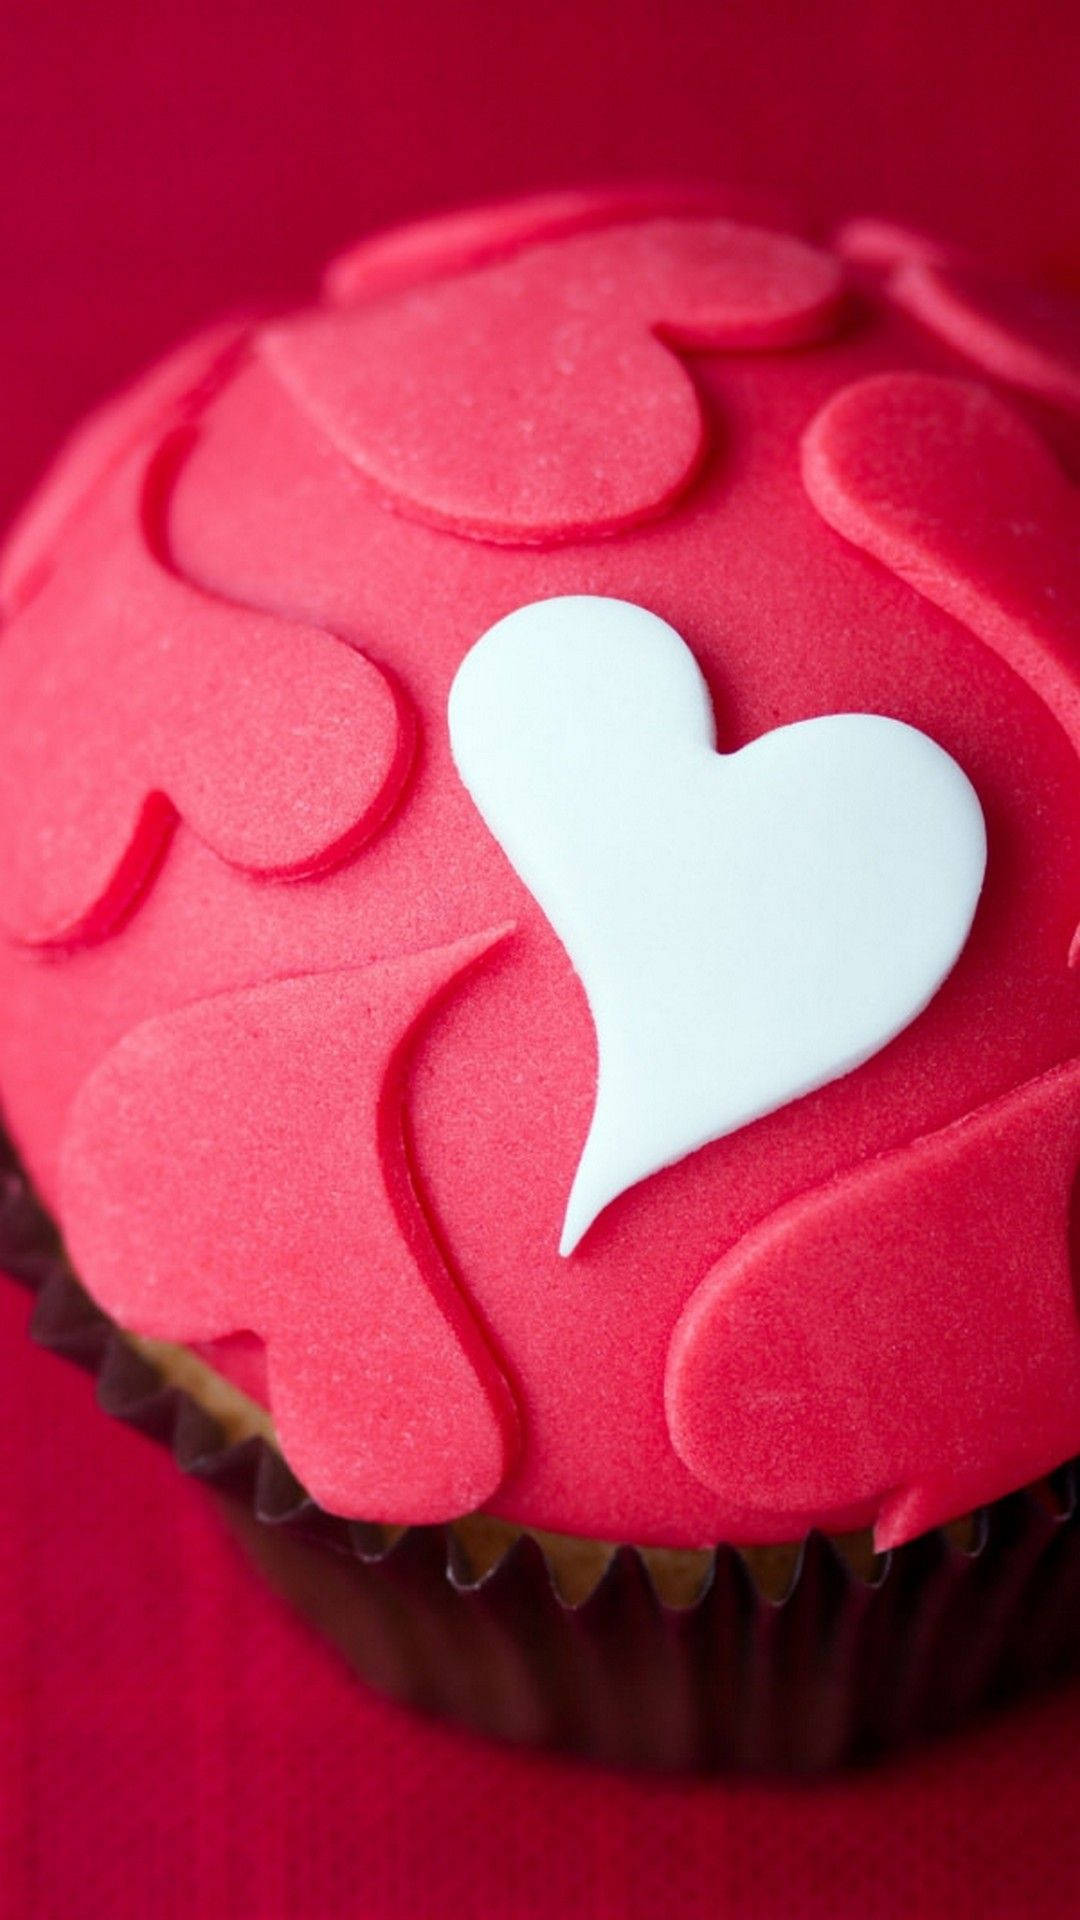 Valentine Cupcakes Cute Android Wallpaper